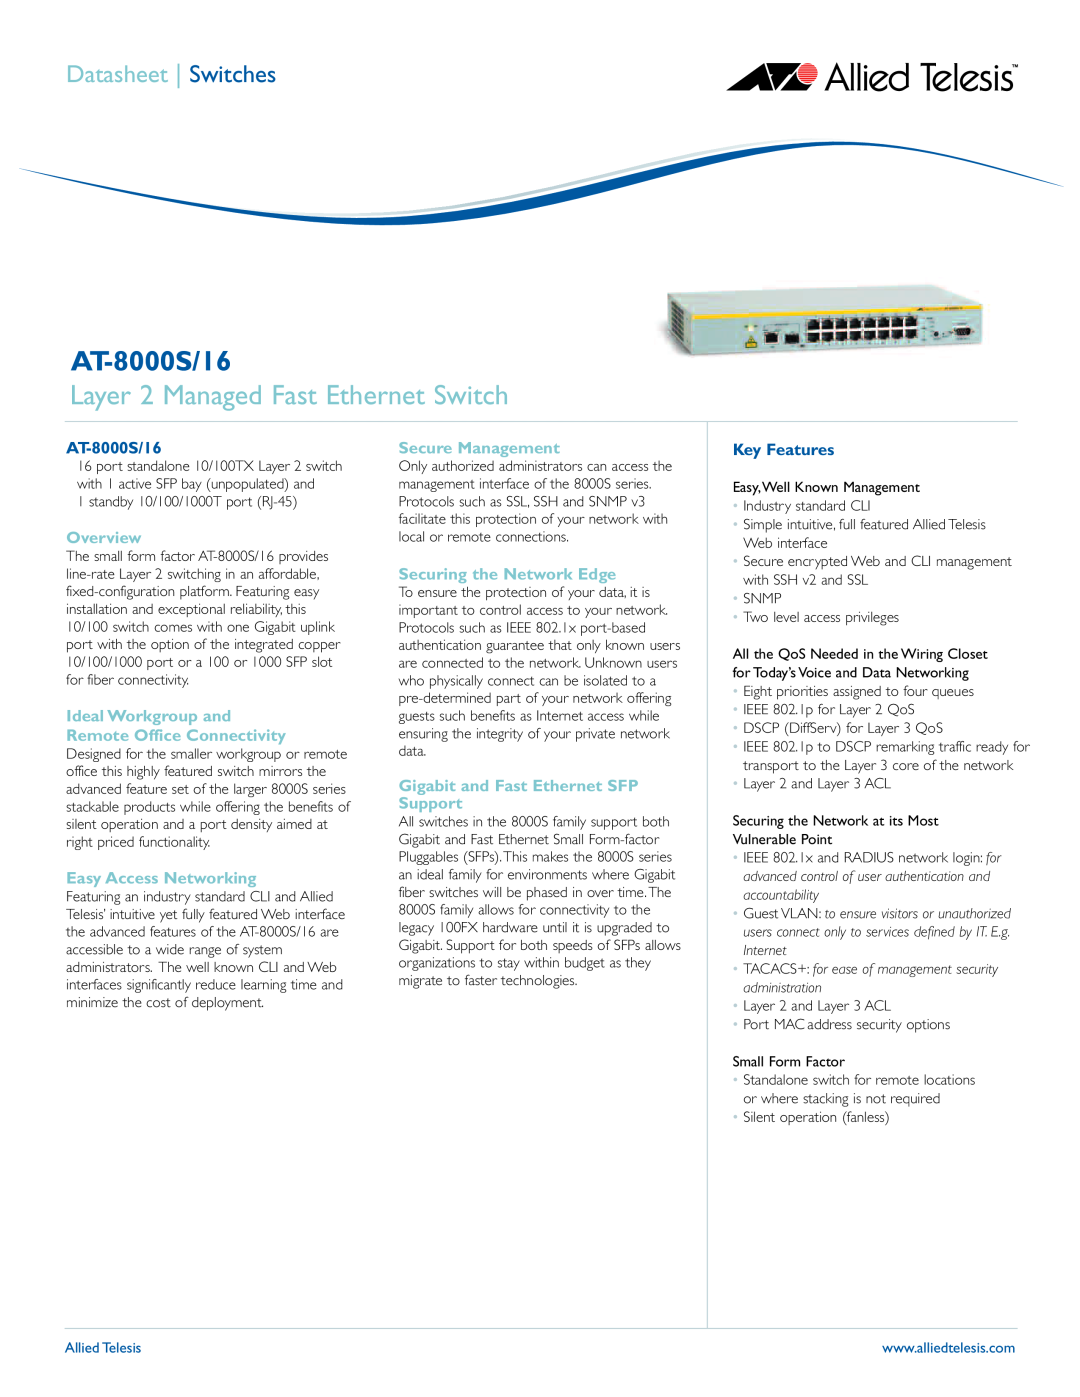 Allied Telesis manual Layer 2 Managed Fast Ethernet Switch, AT-8000S/16, Overview, Easy Access Networking, Key Features 